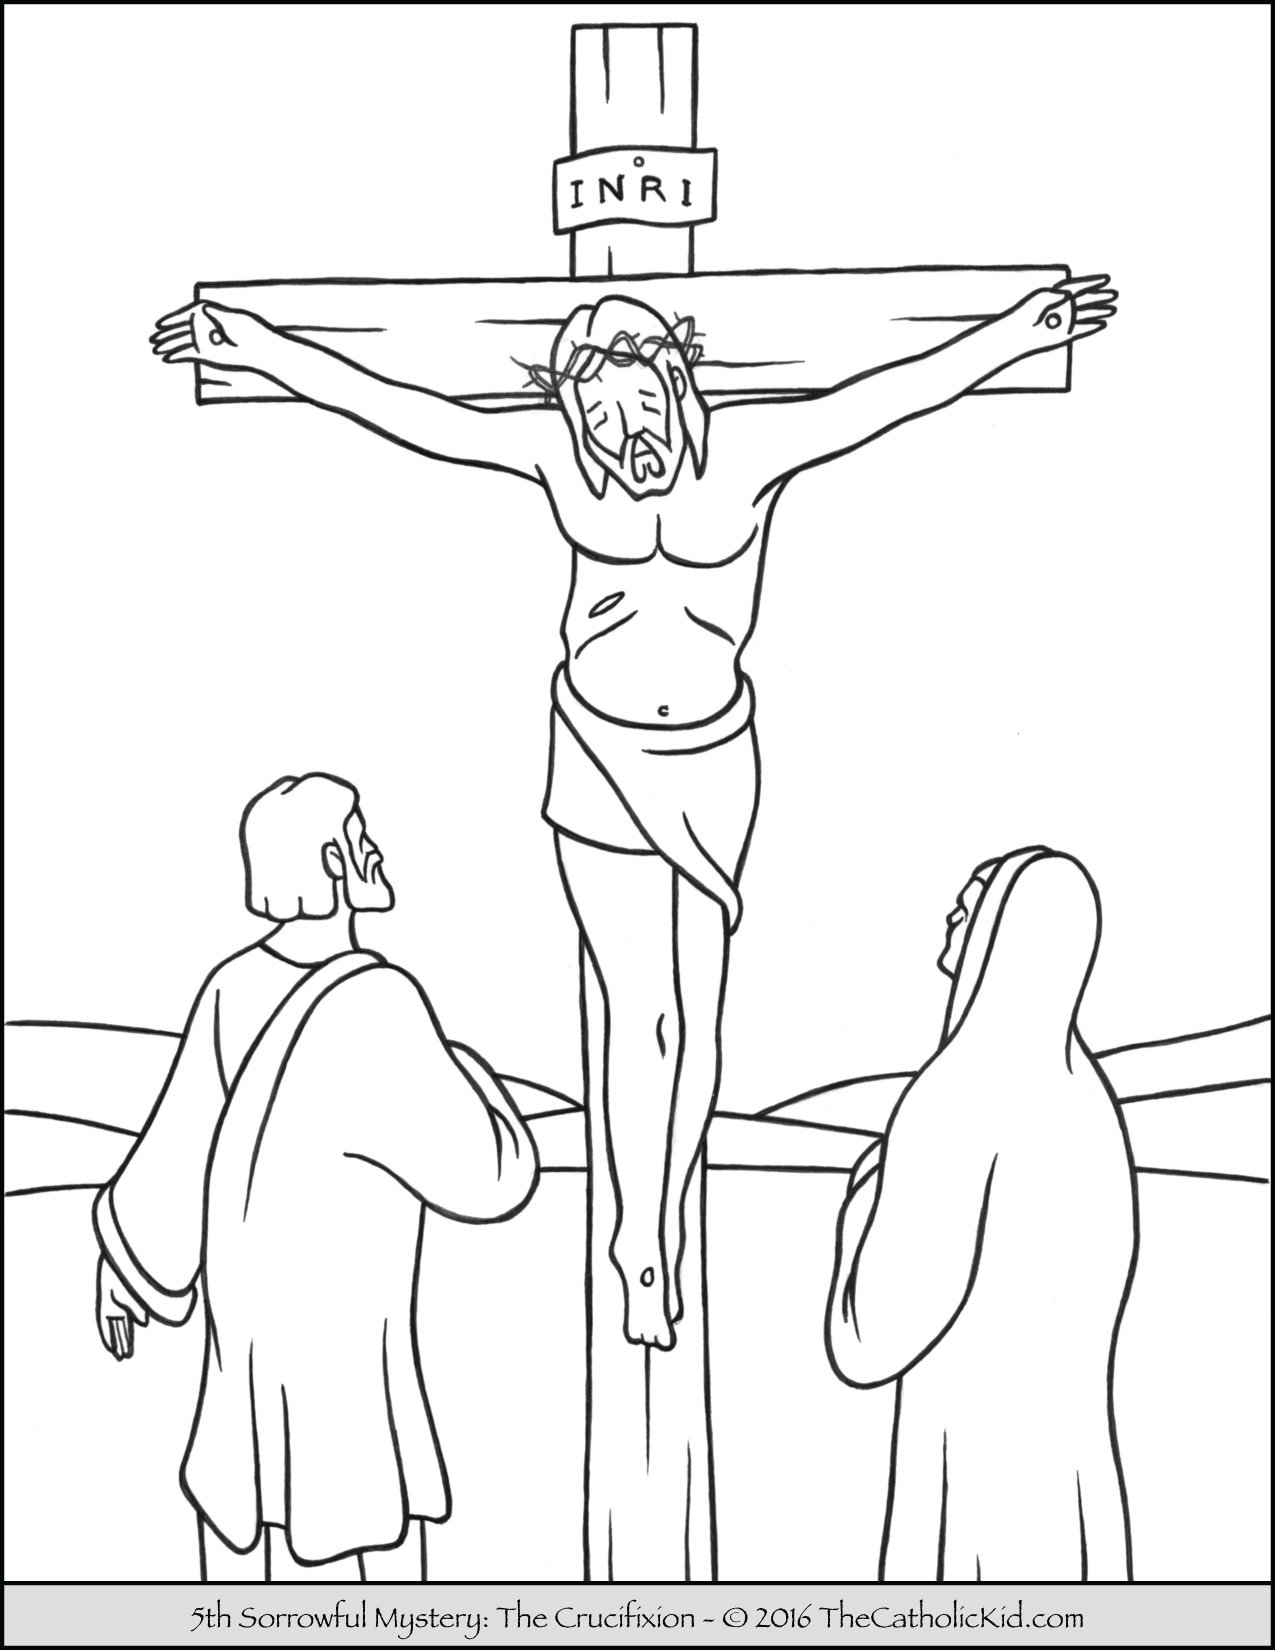 Jesus Archives - Page 6 of 6 - The Catholic Kid - Catholic Coloring Pages  and Games for Children